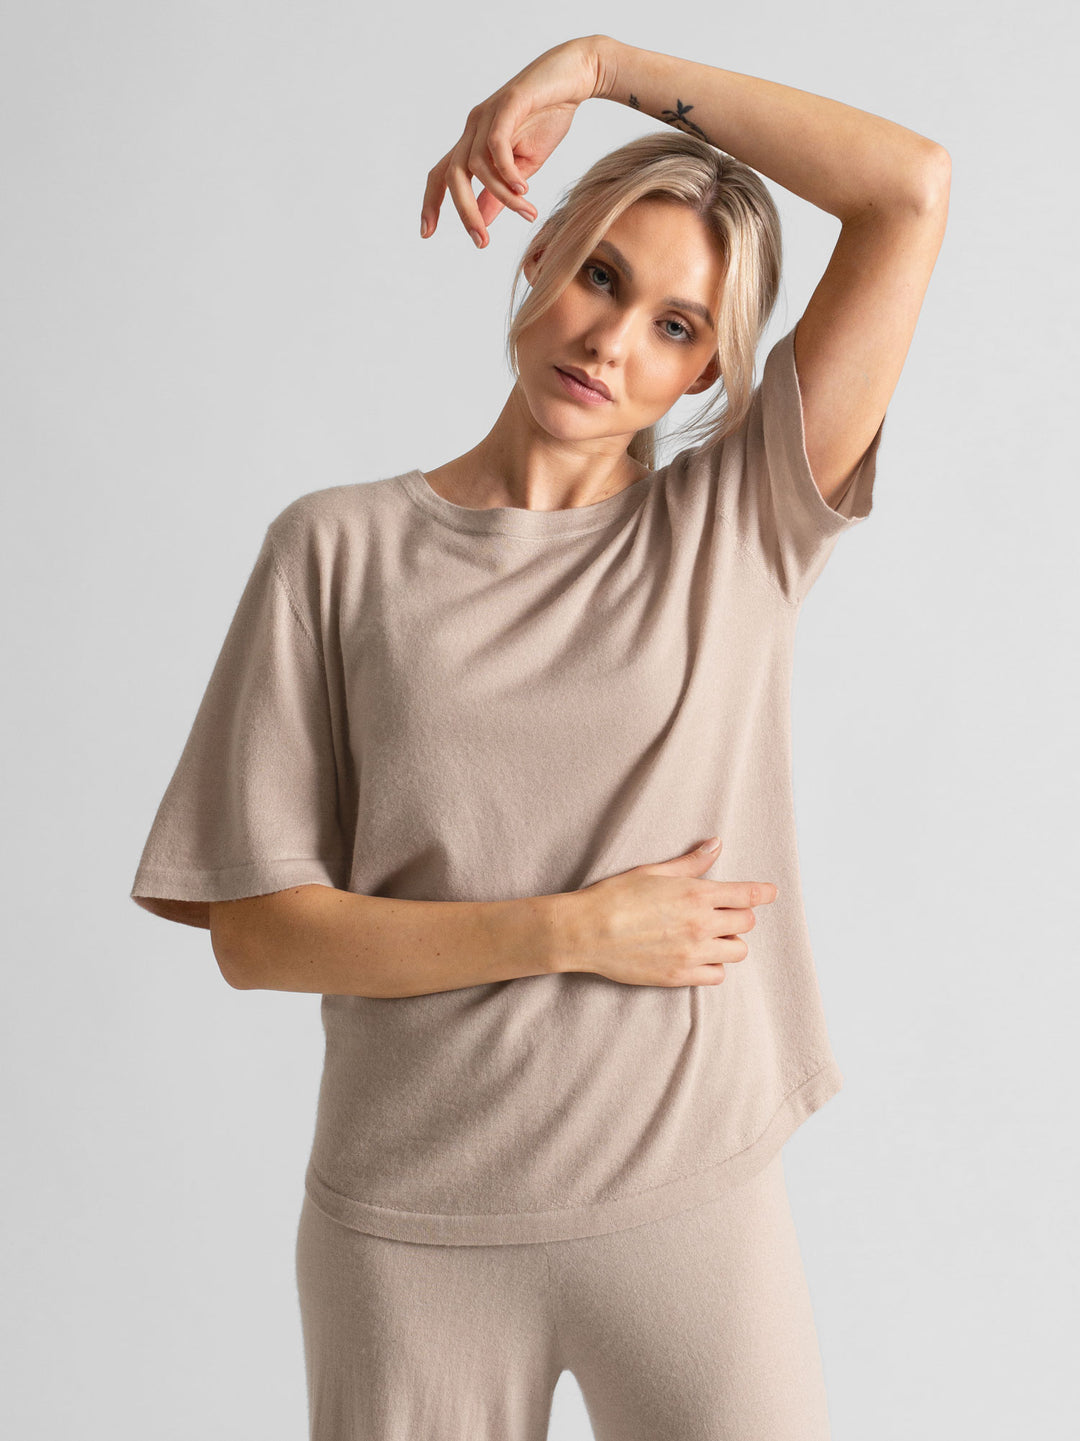 Cashmere t-shirt "Airy" in 100% pure cashmere. Color: Feather. Scandinavian design by Kashmina. 